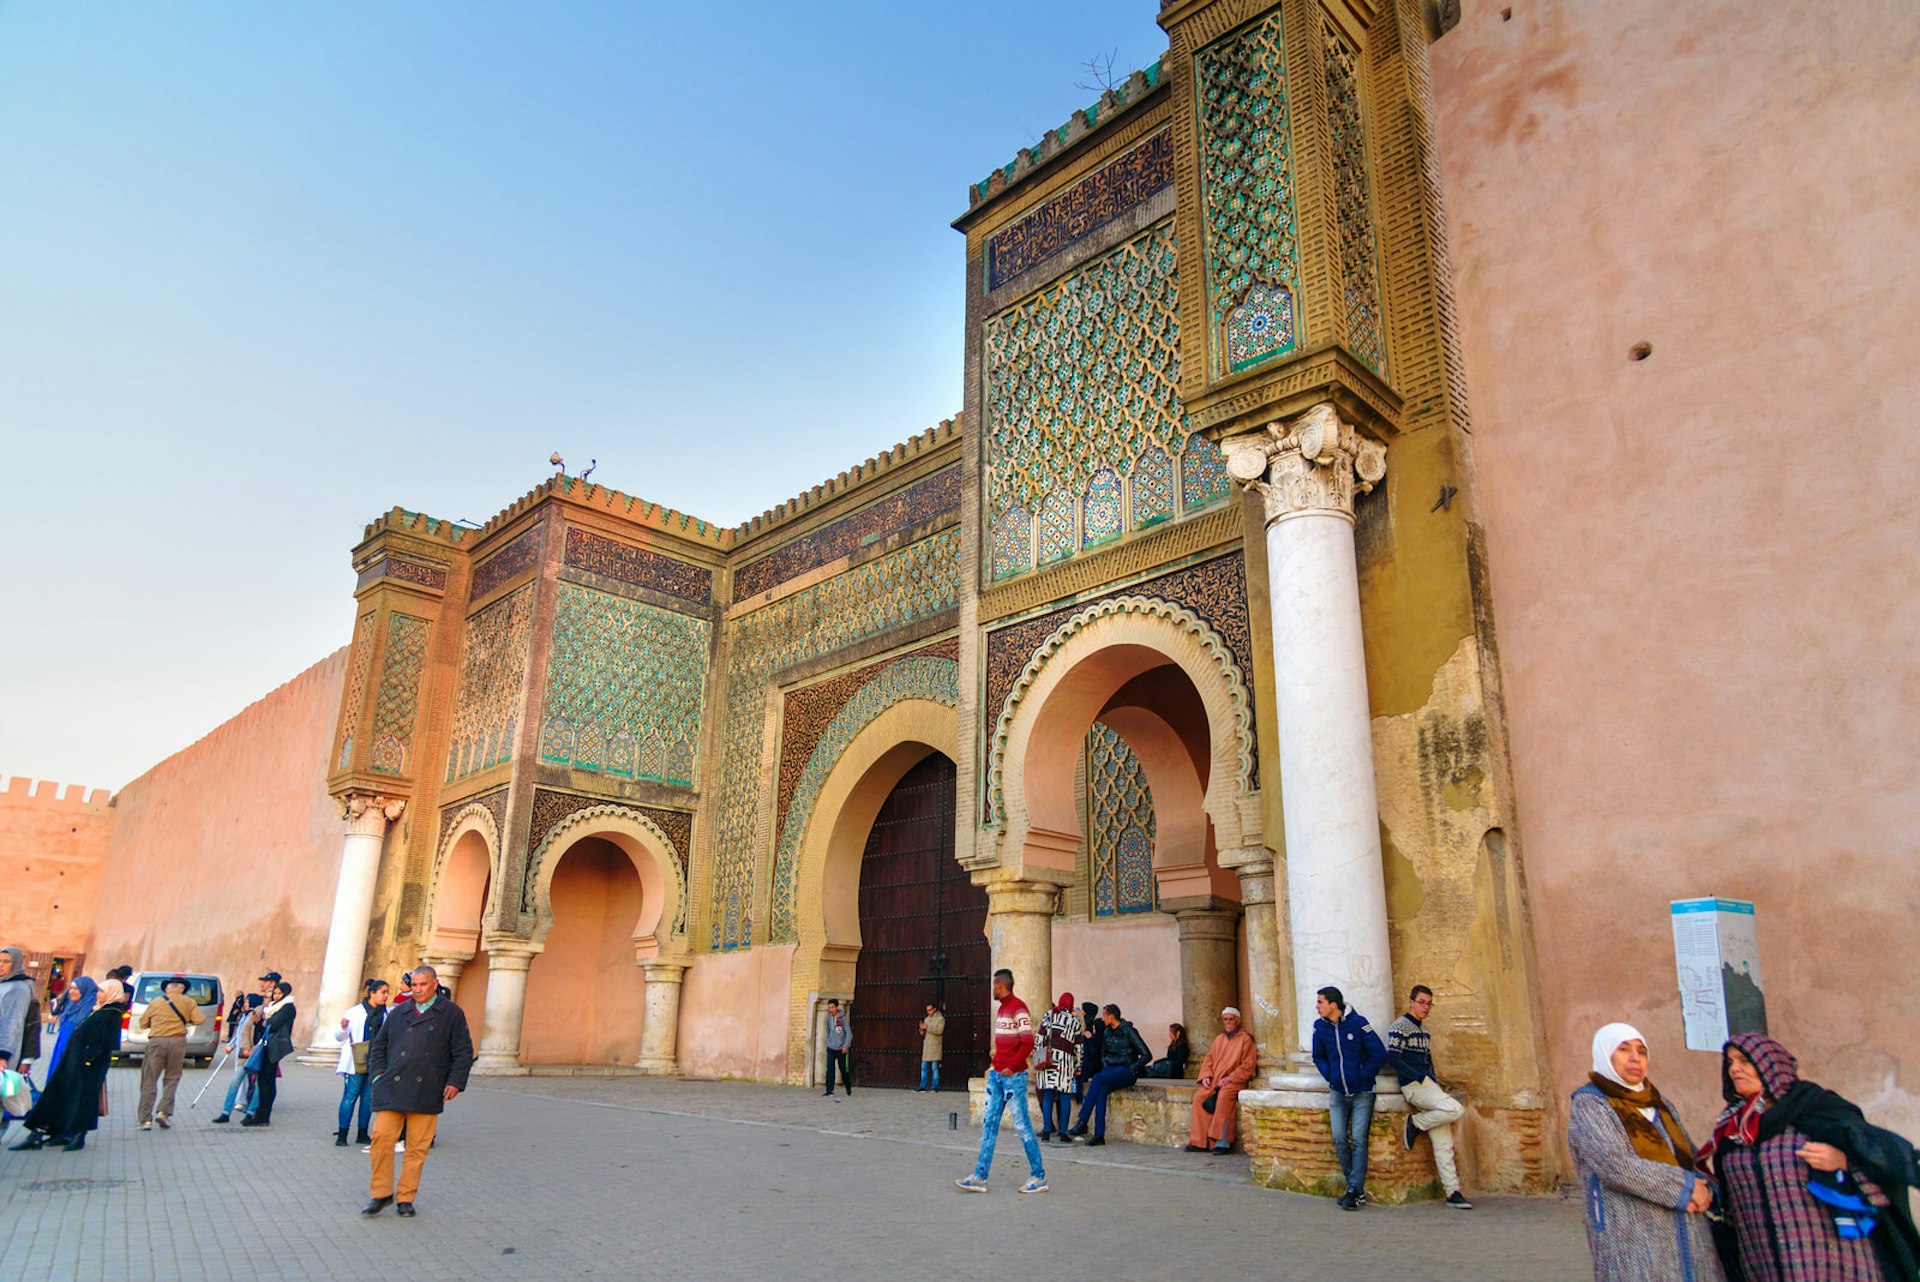 Beautiful Bab El Mansour was built from plundered materials when the capital was moved from Marrakesh to Meknès © Elena Odareeva / Shutterstock